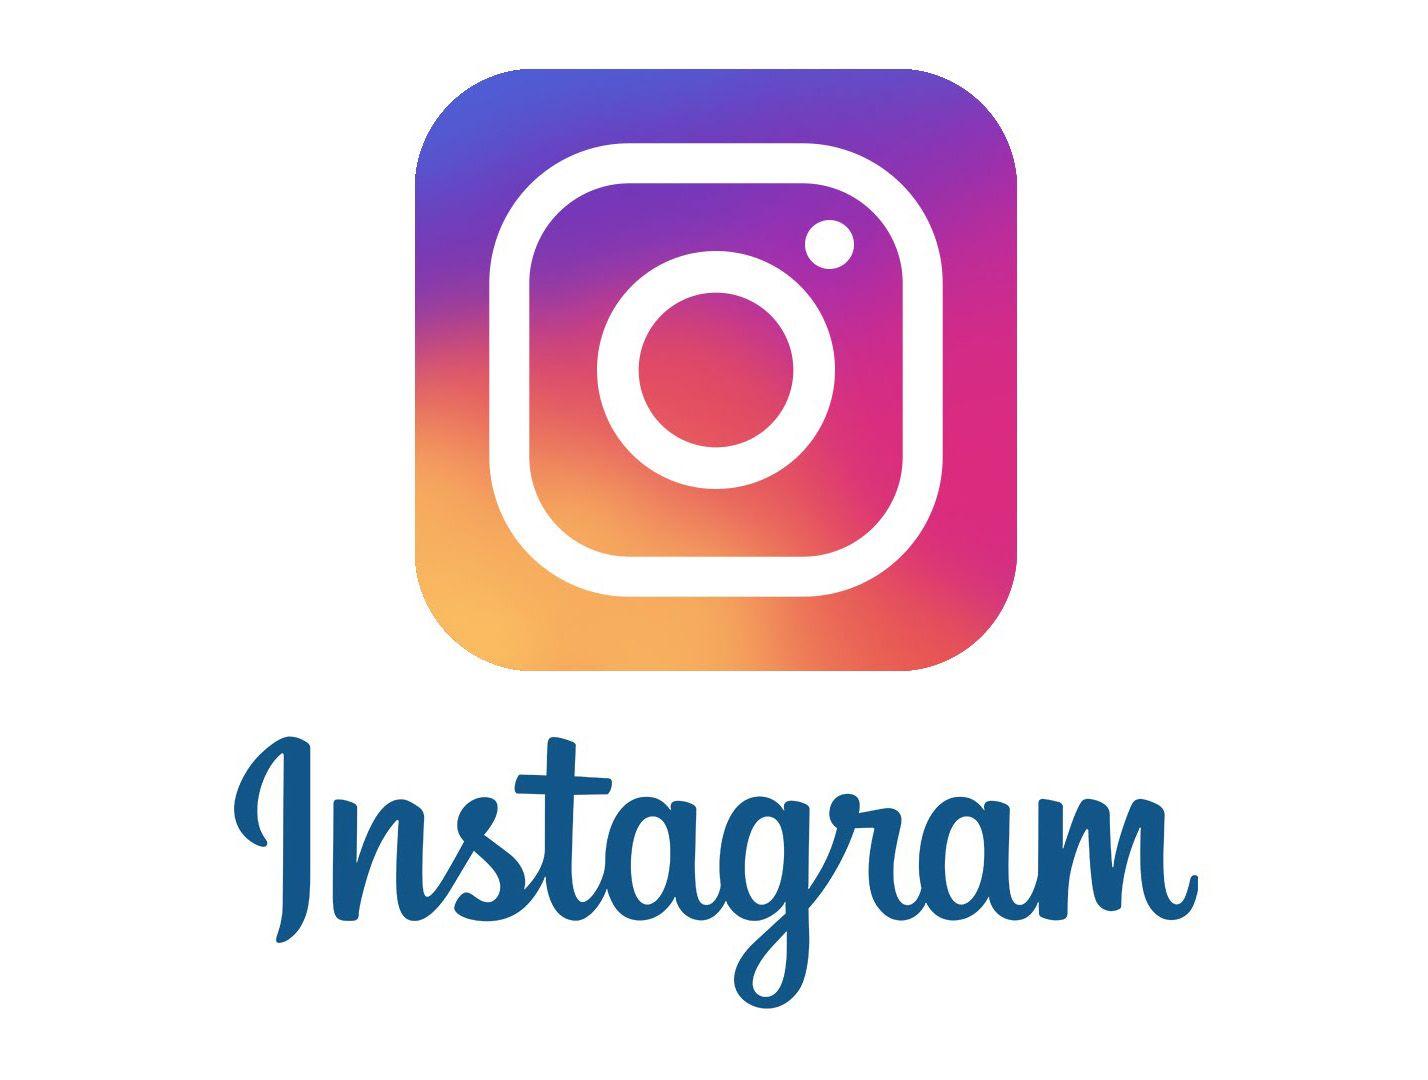 New Instagram Logo - Instagram Logo, Instagram Symbol Meaning, History and Evolution